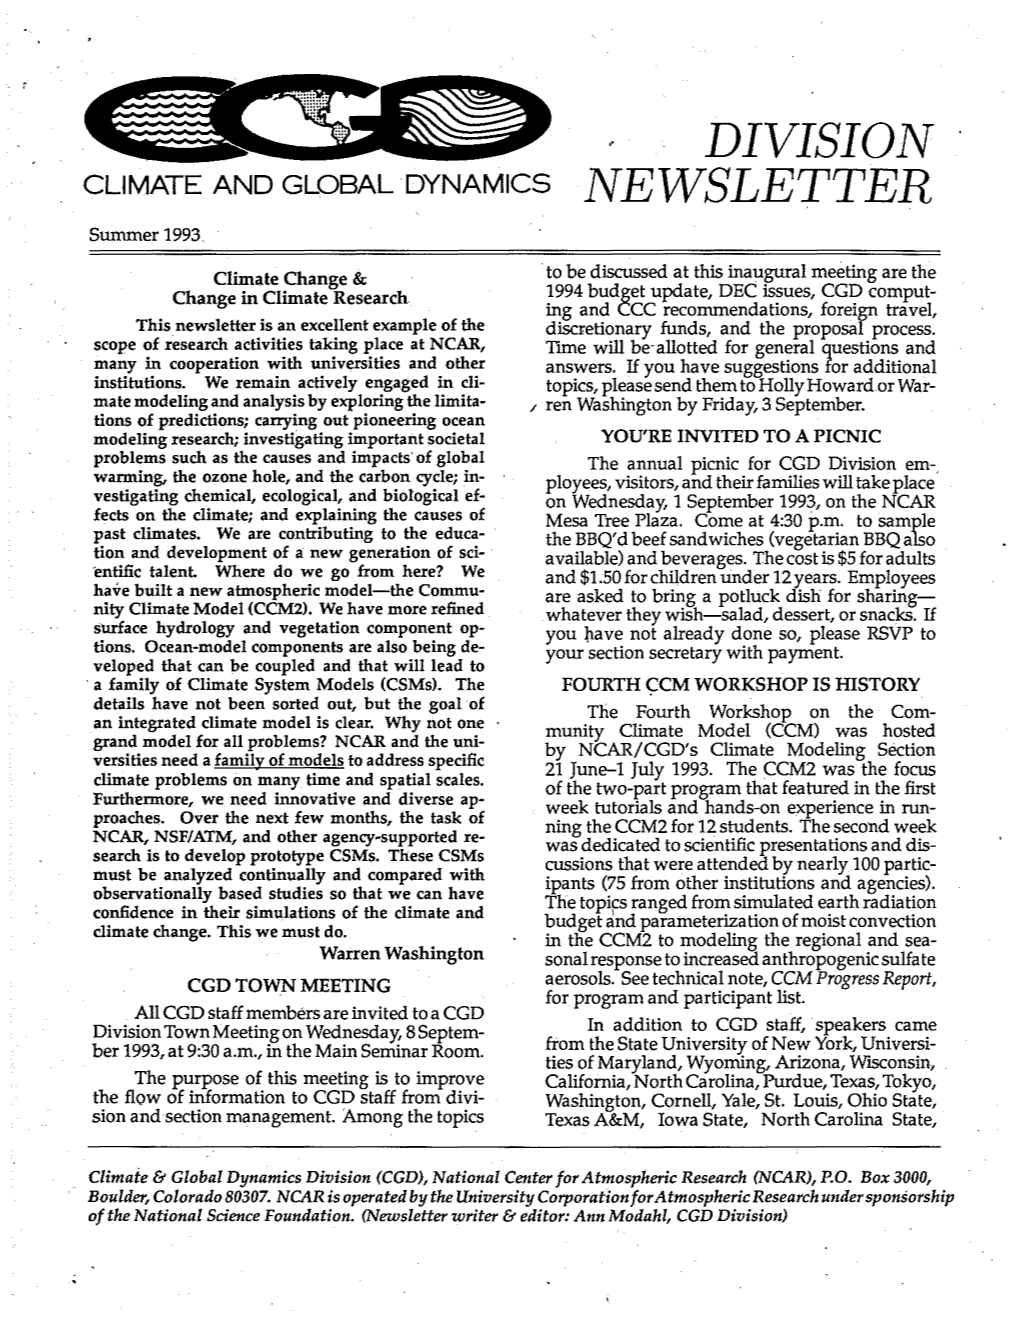 CLIMATE and GLOBAL DYNAMICS NEWSLETTER Summer 1993